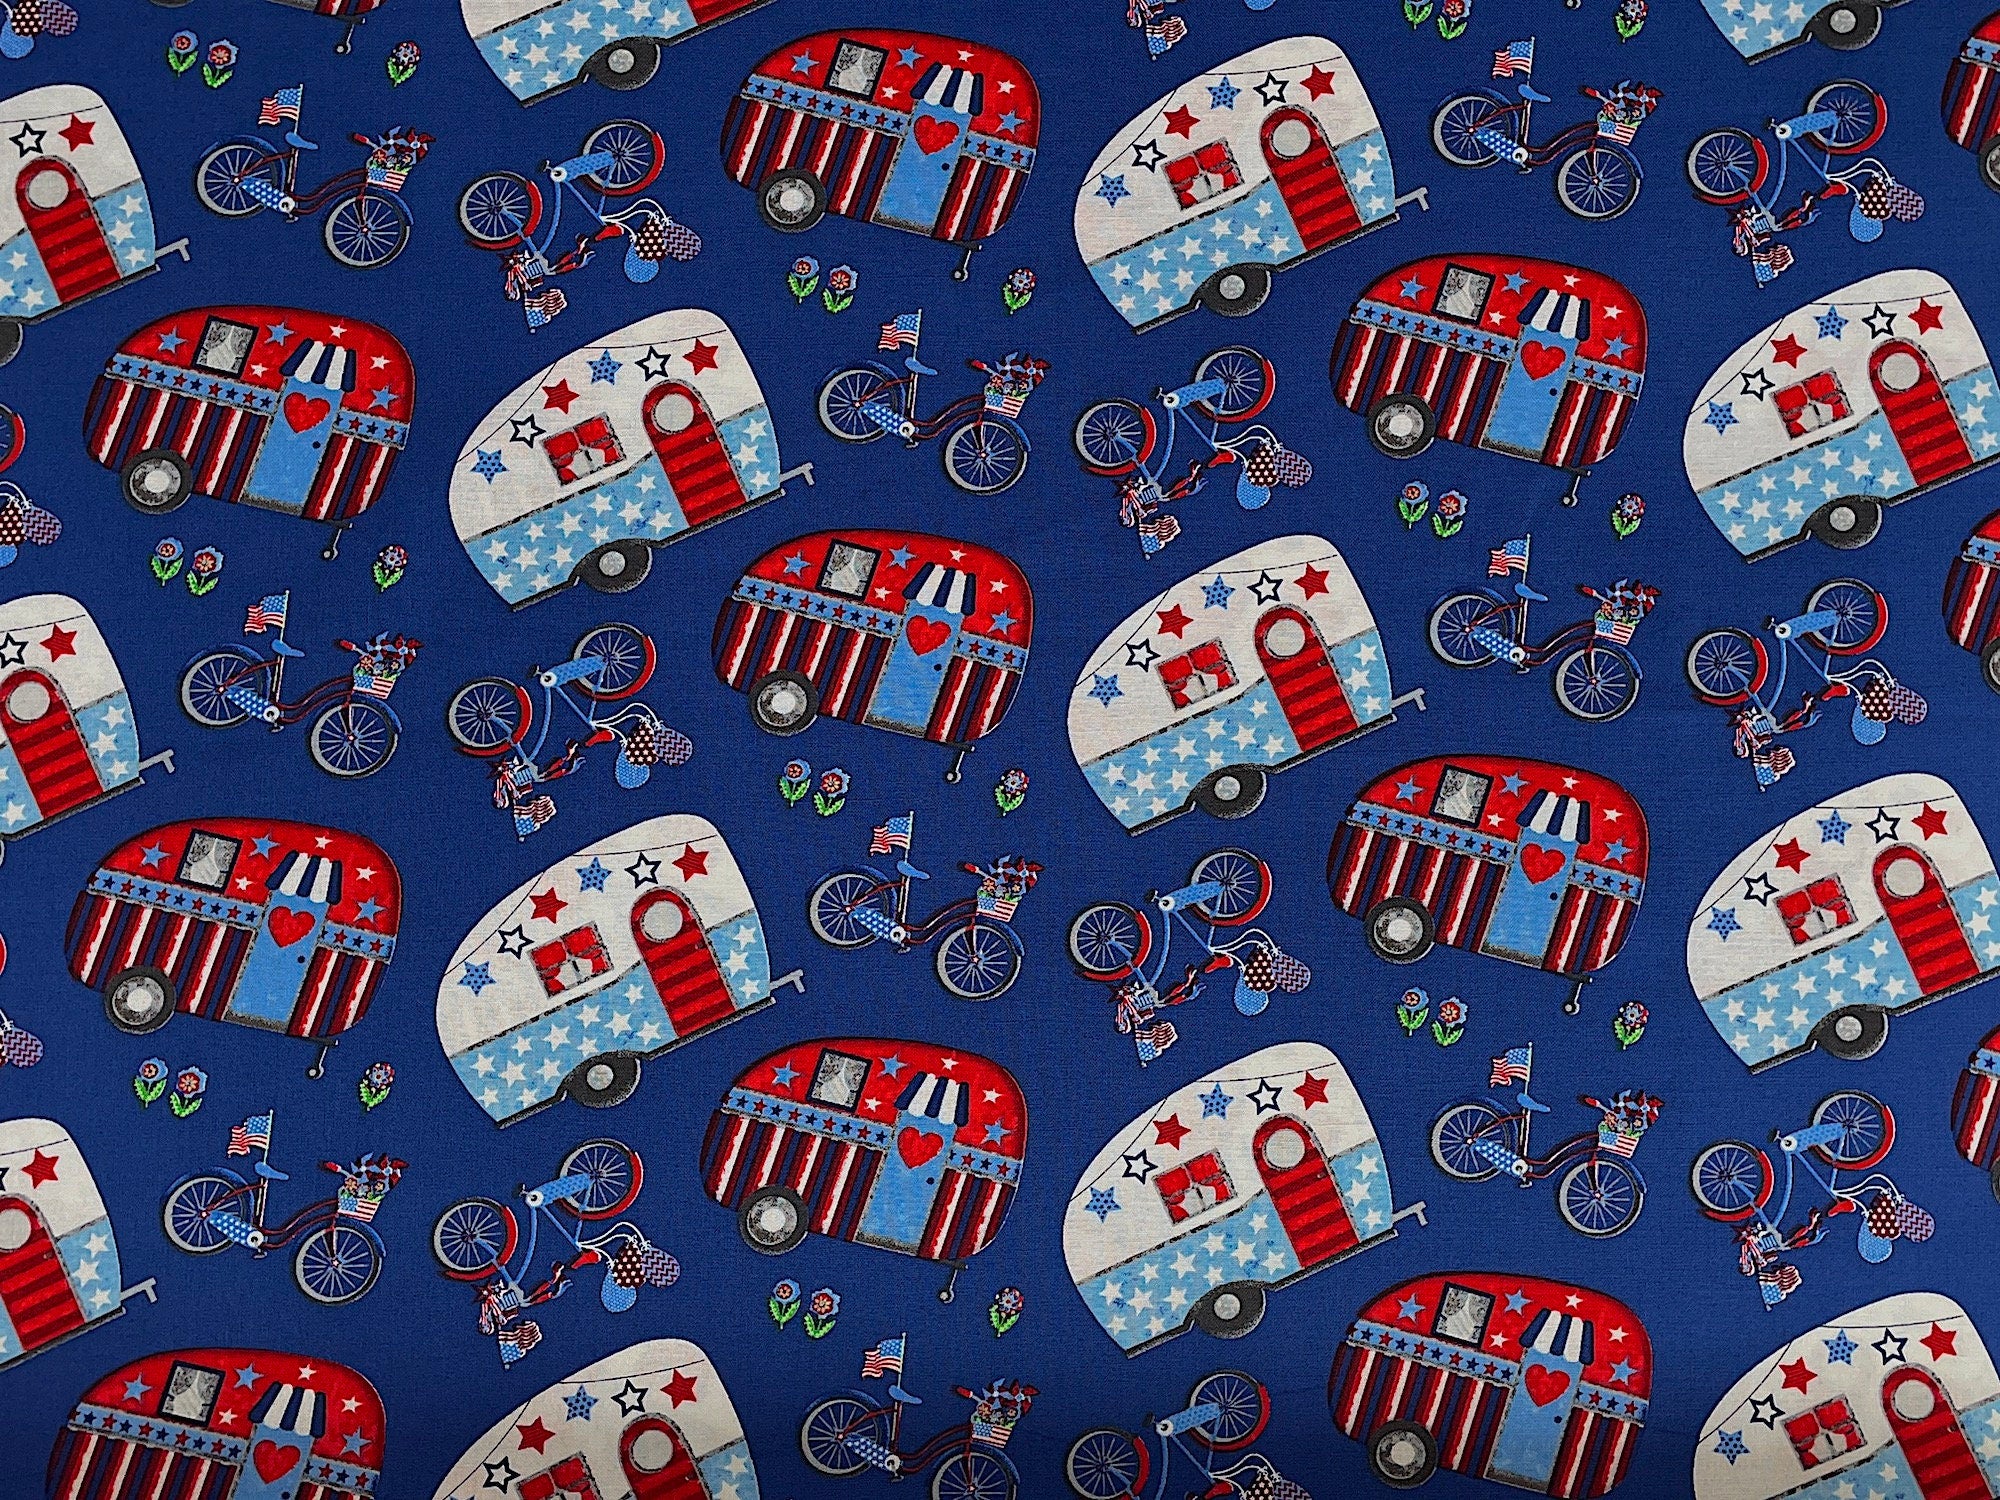 Blue cotton fabric covered with travel trailers.